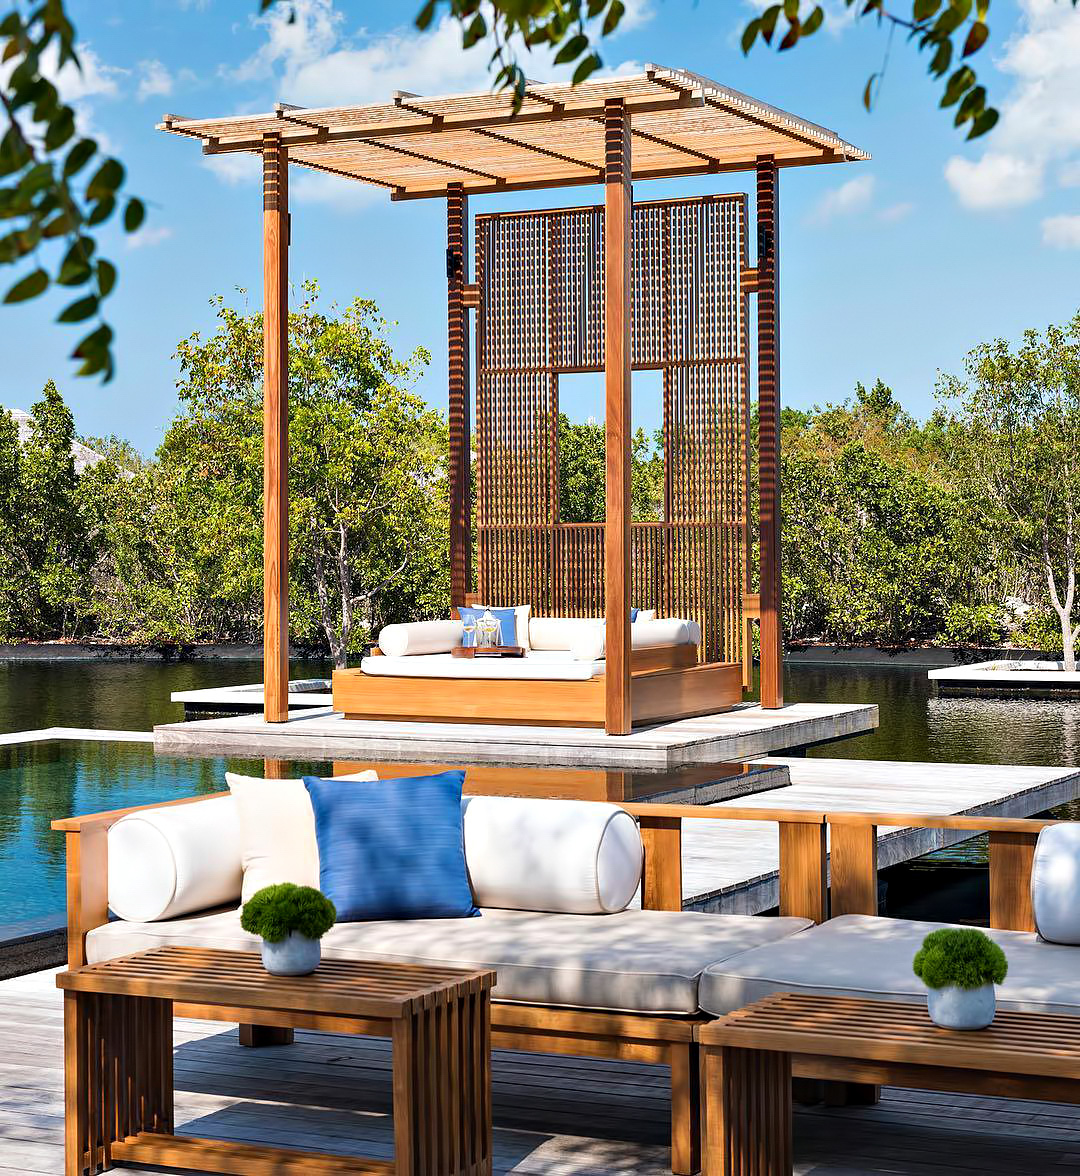 Amanyara Resort – Providenciales, Turks and Caicos Islands – 4 Bedroom Tranquility Villa Infinity Pool Lounge Chairs